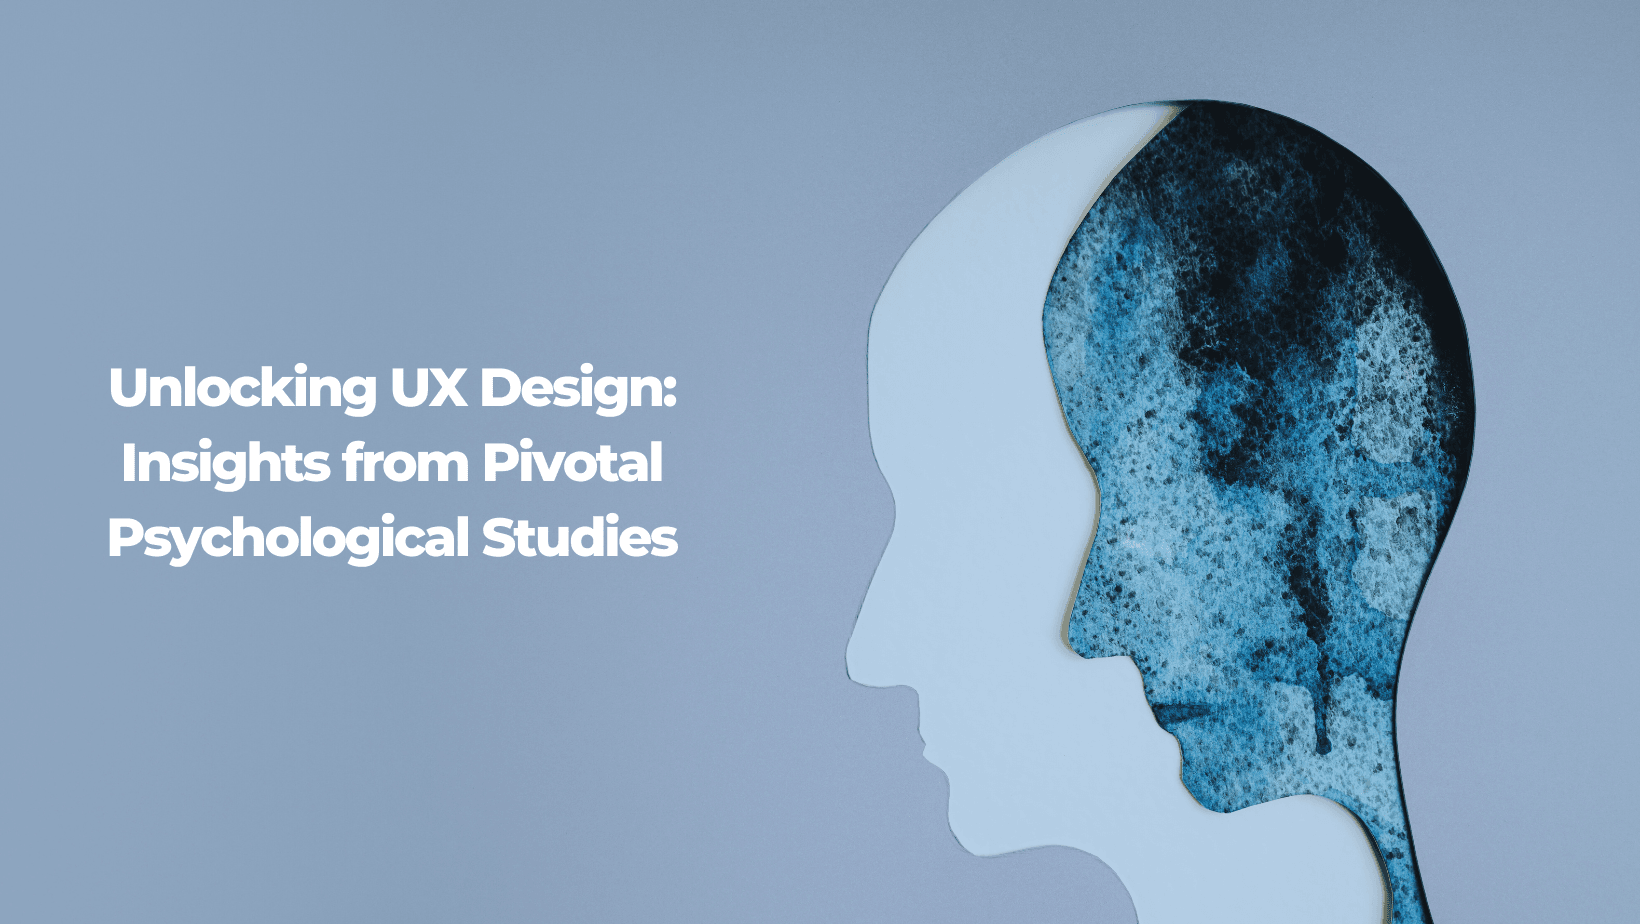 Unlocking UX Design: Insights from Pivotal Psychological Studies